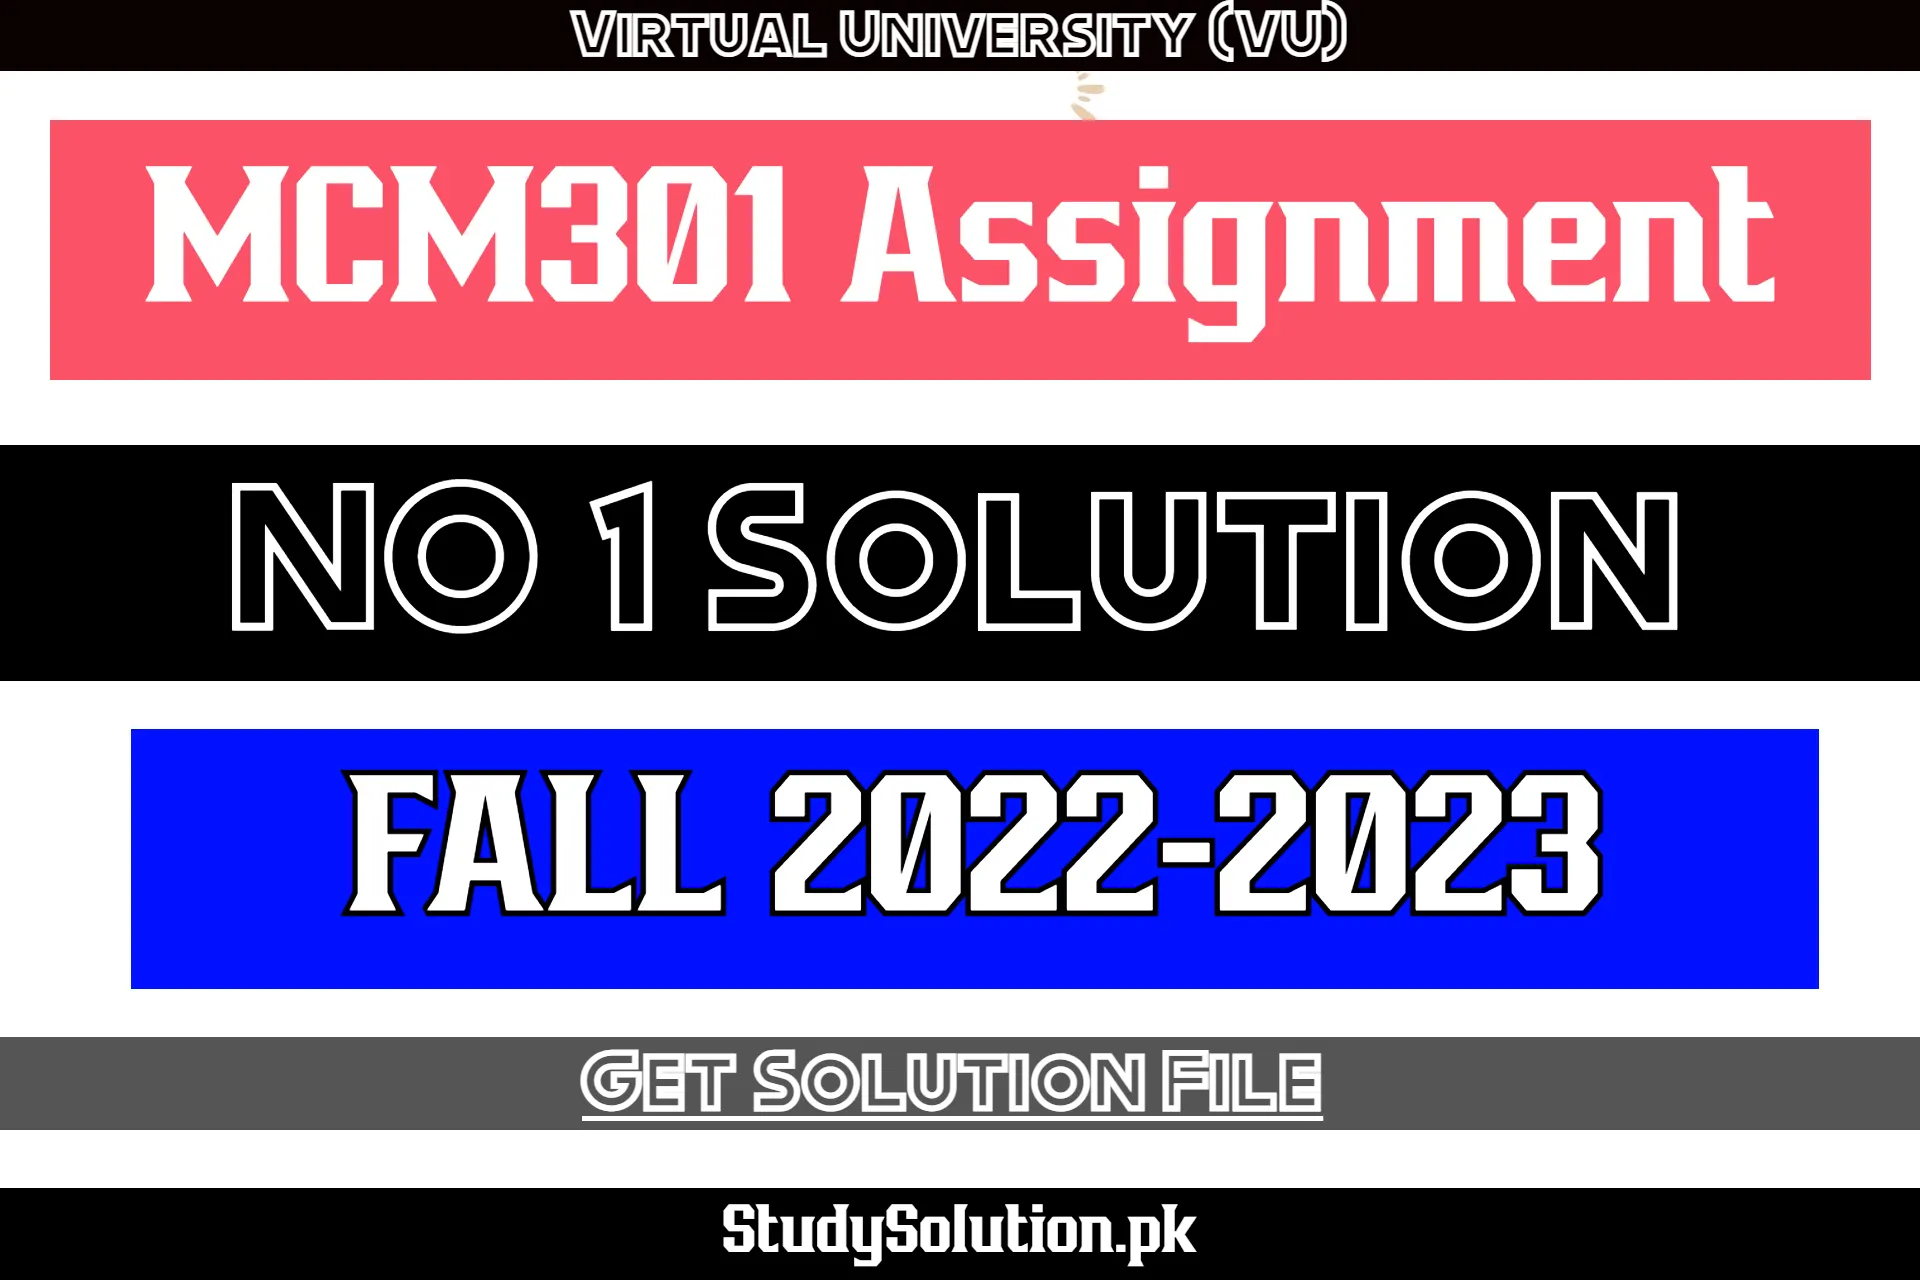 MCM301 Assignment No 1 Solution Fall 2022